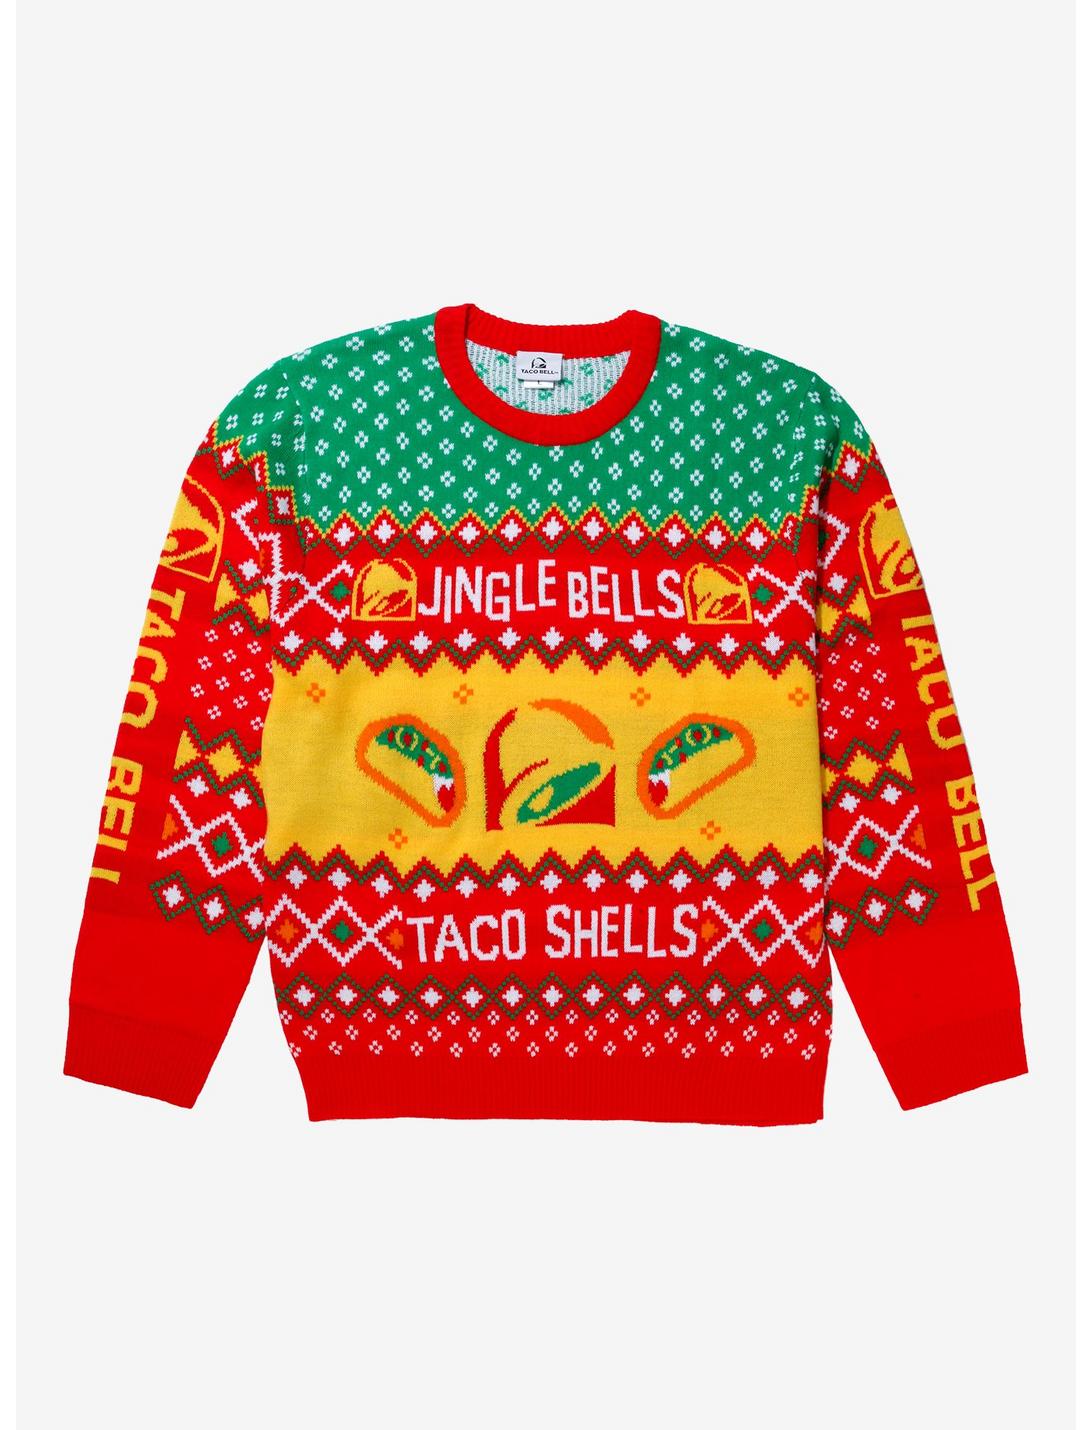 Taco Bell Jingle Bells Taco Shells Holiday Sweater - BoxLunch Exclusive, RED, hi-res